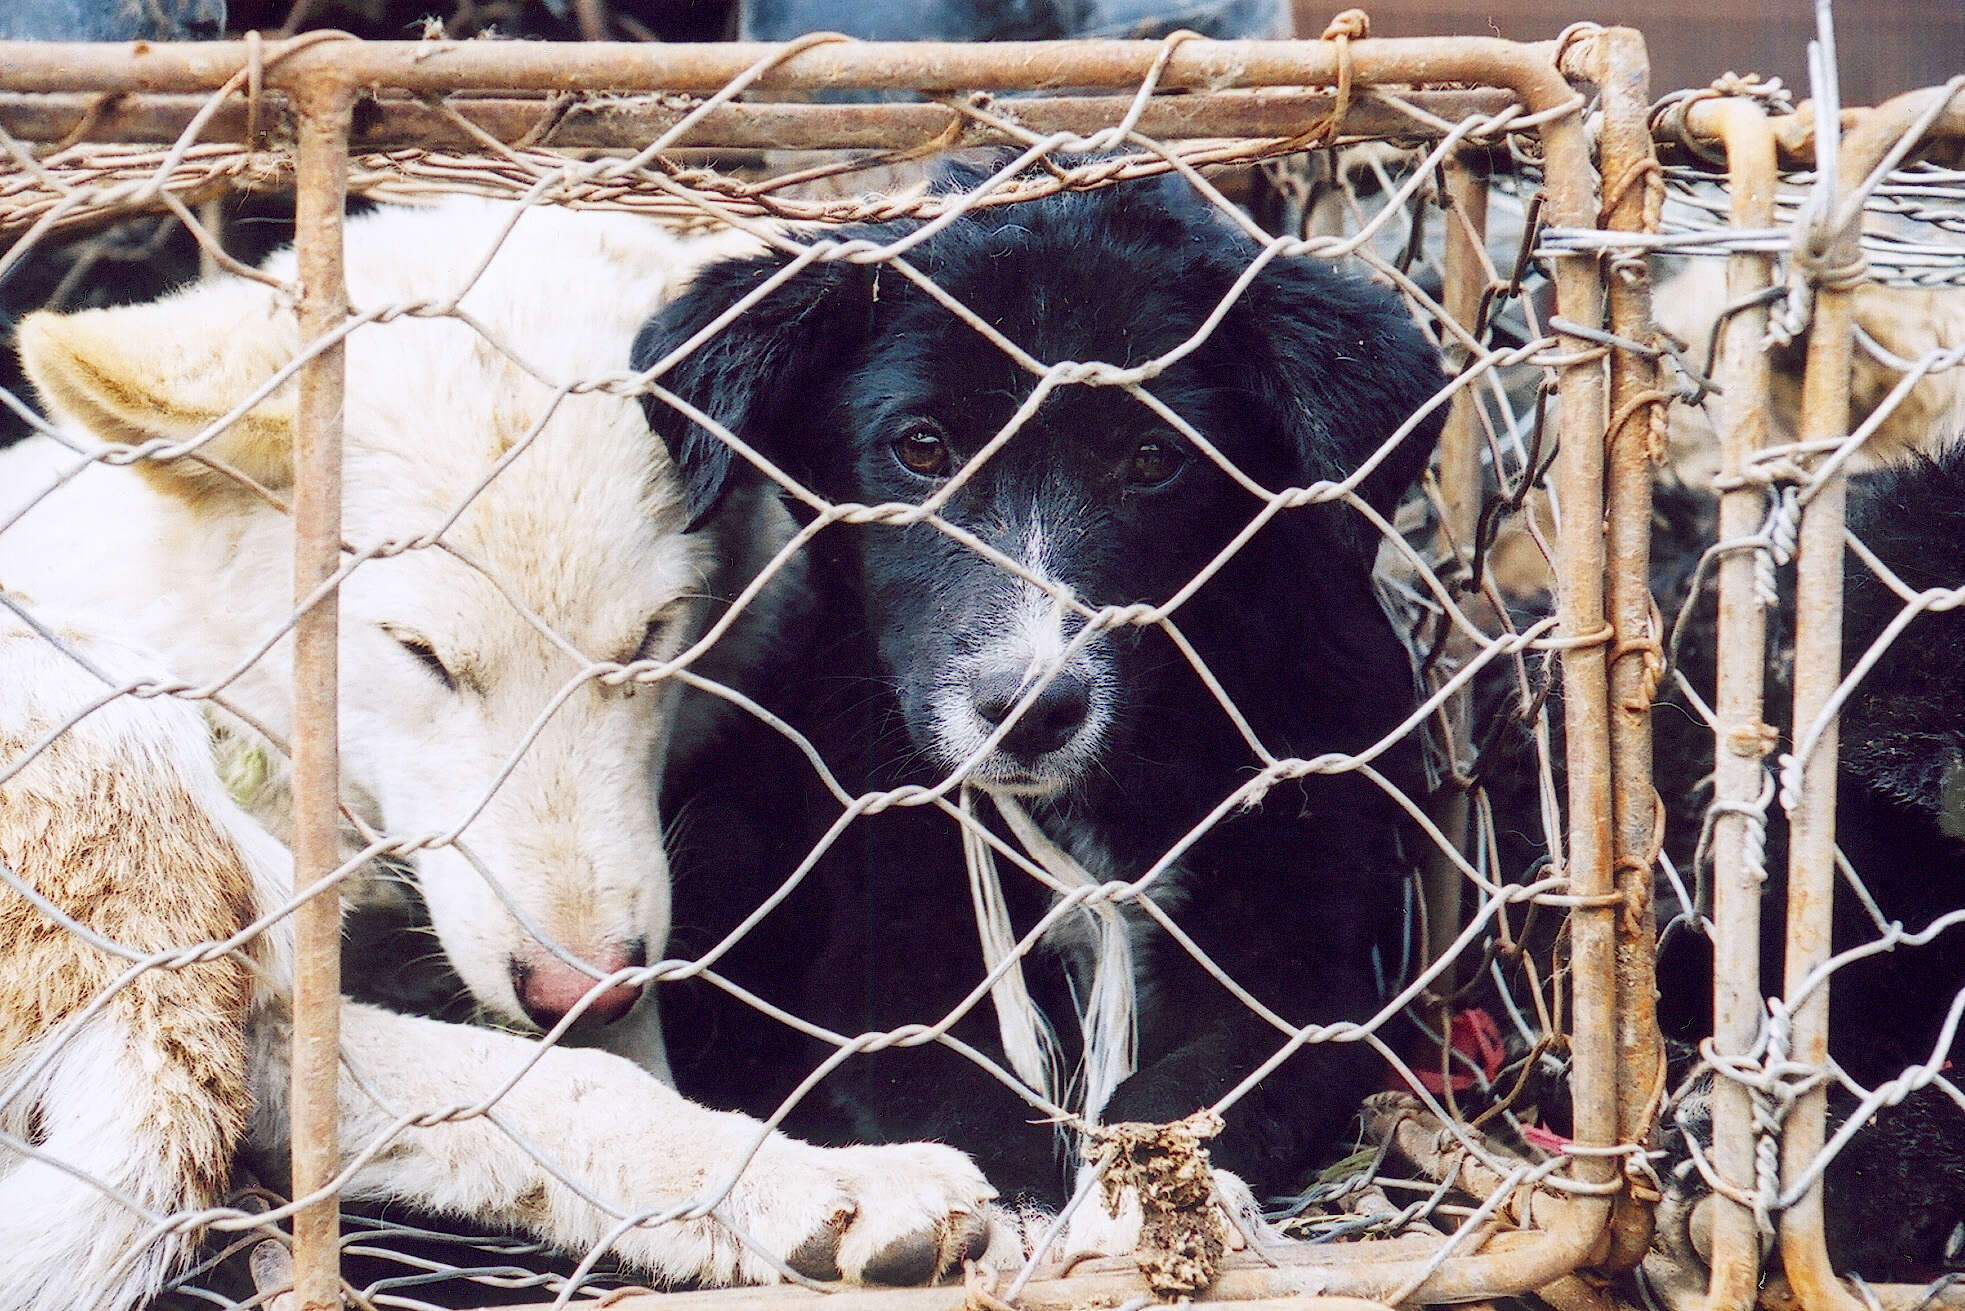 Caged dogs in China